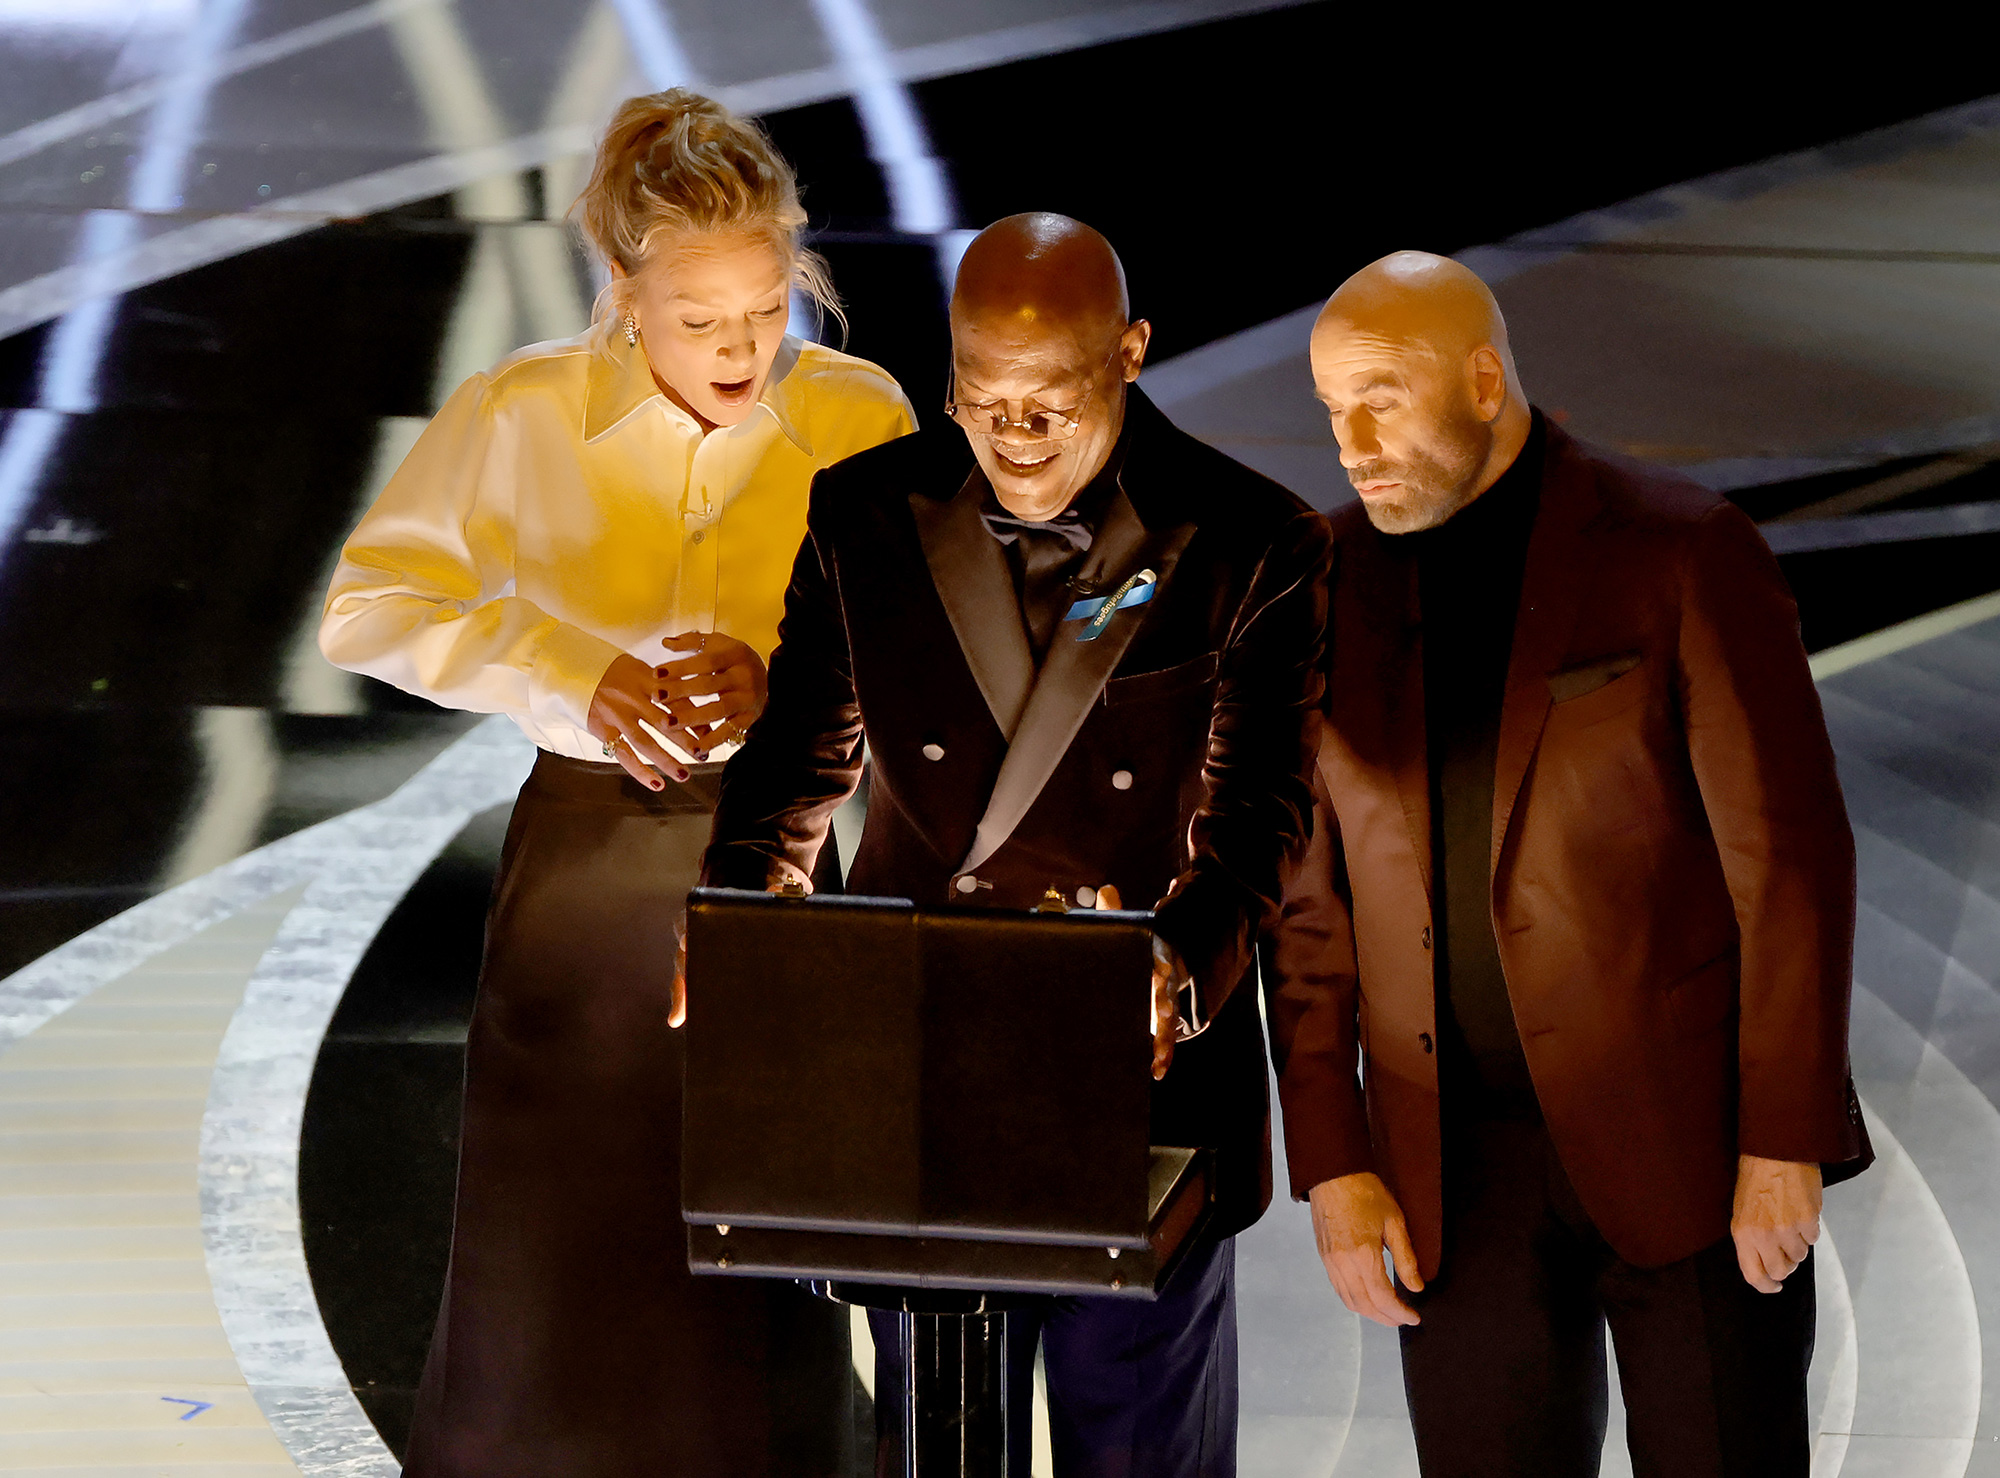 From left: Uma Thurman, Samuel L. Jackson, and John Travolta speak onstage during the 94th Annual Academy Awards.